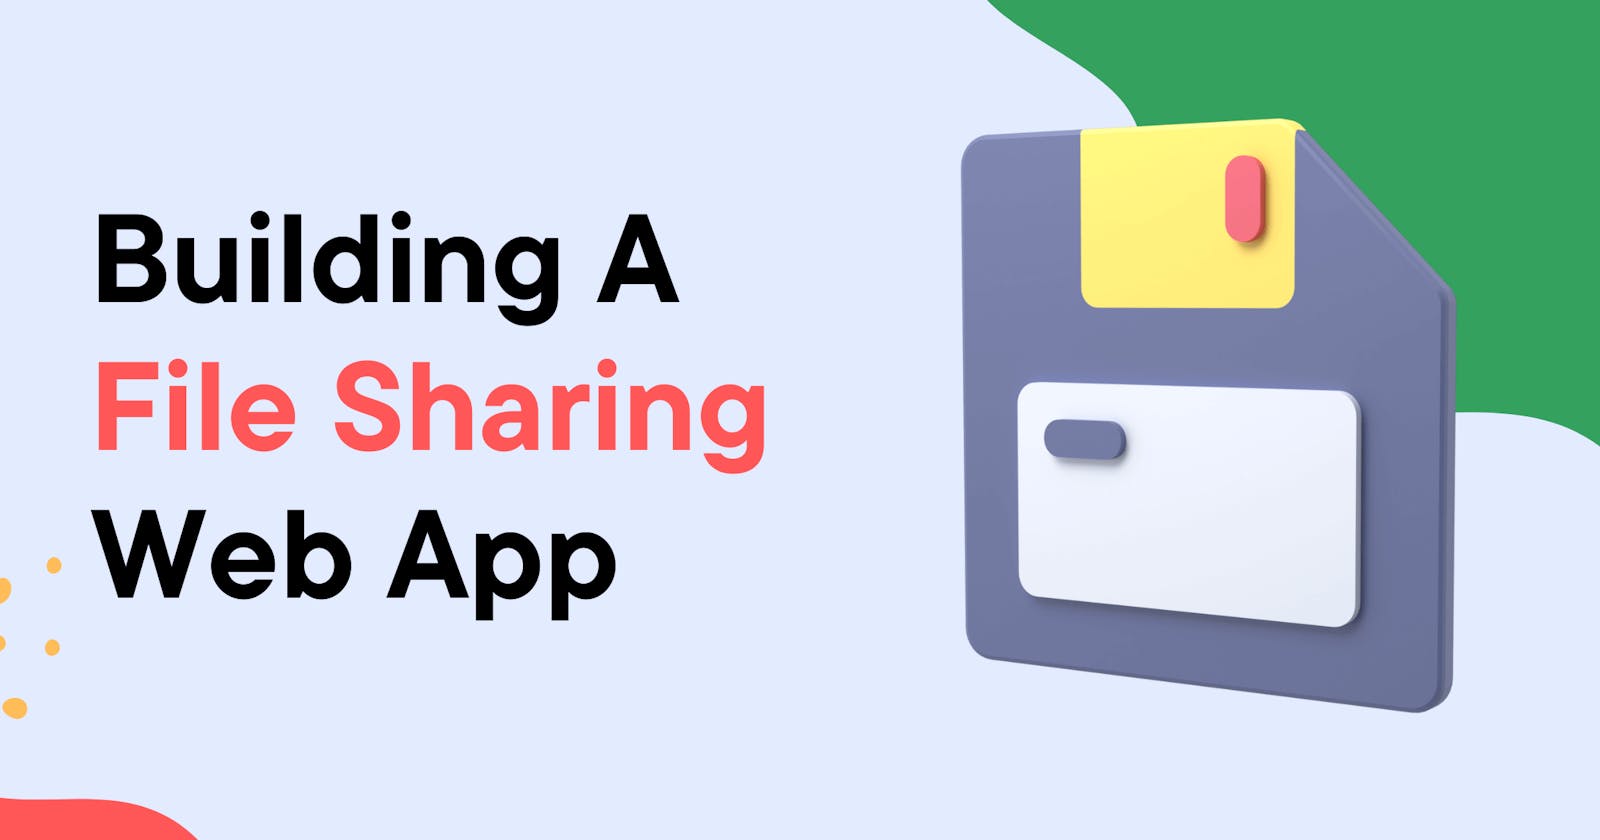 Building a FIle sharing web app